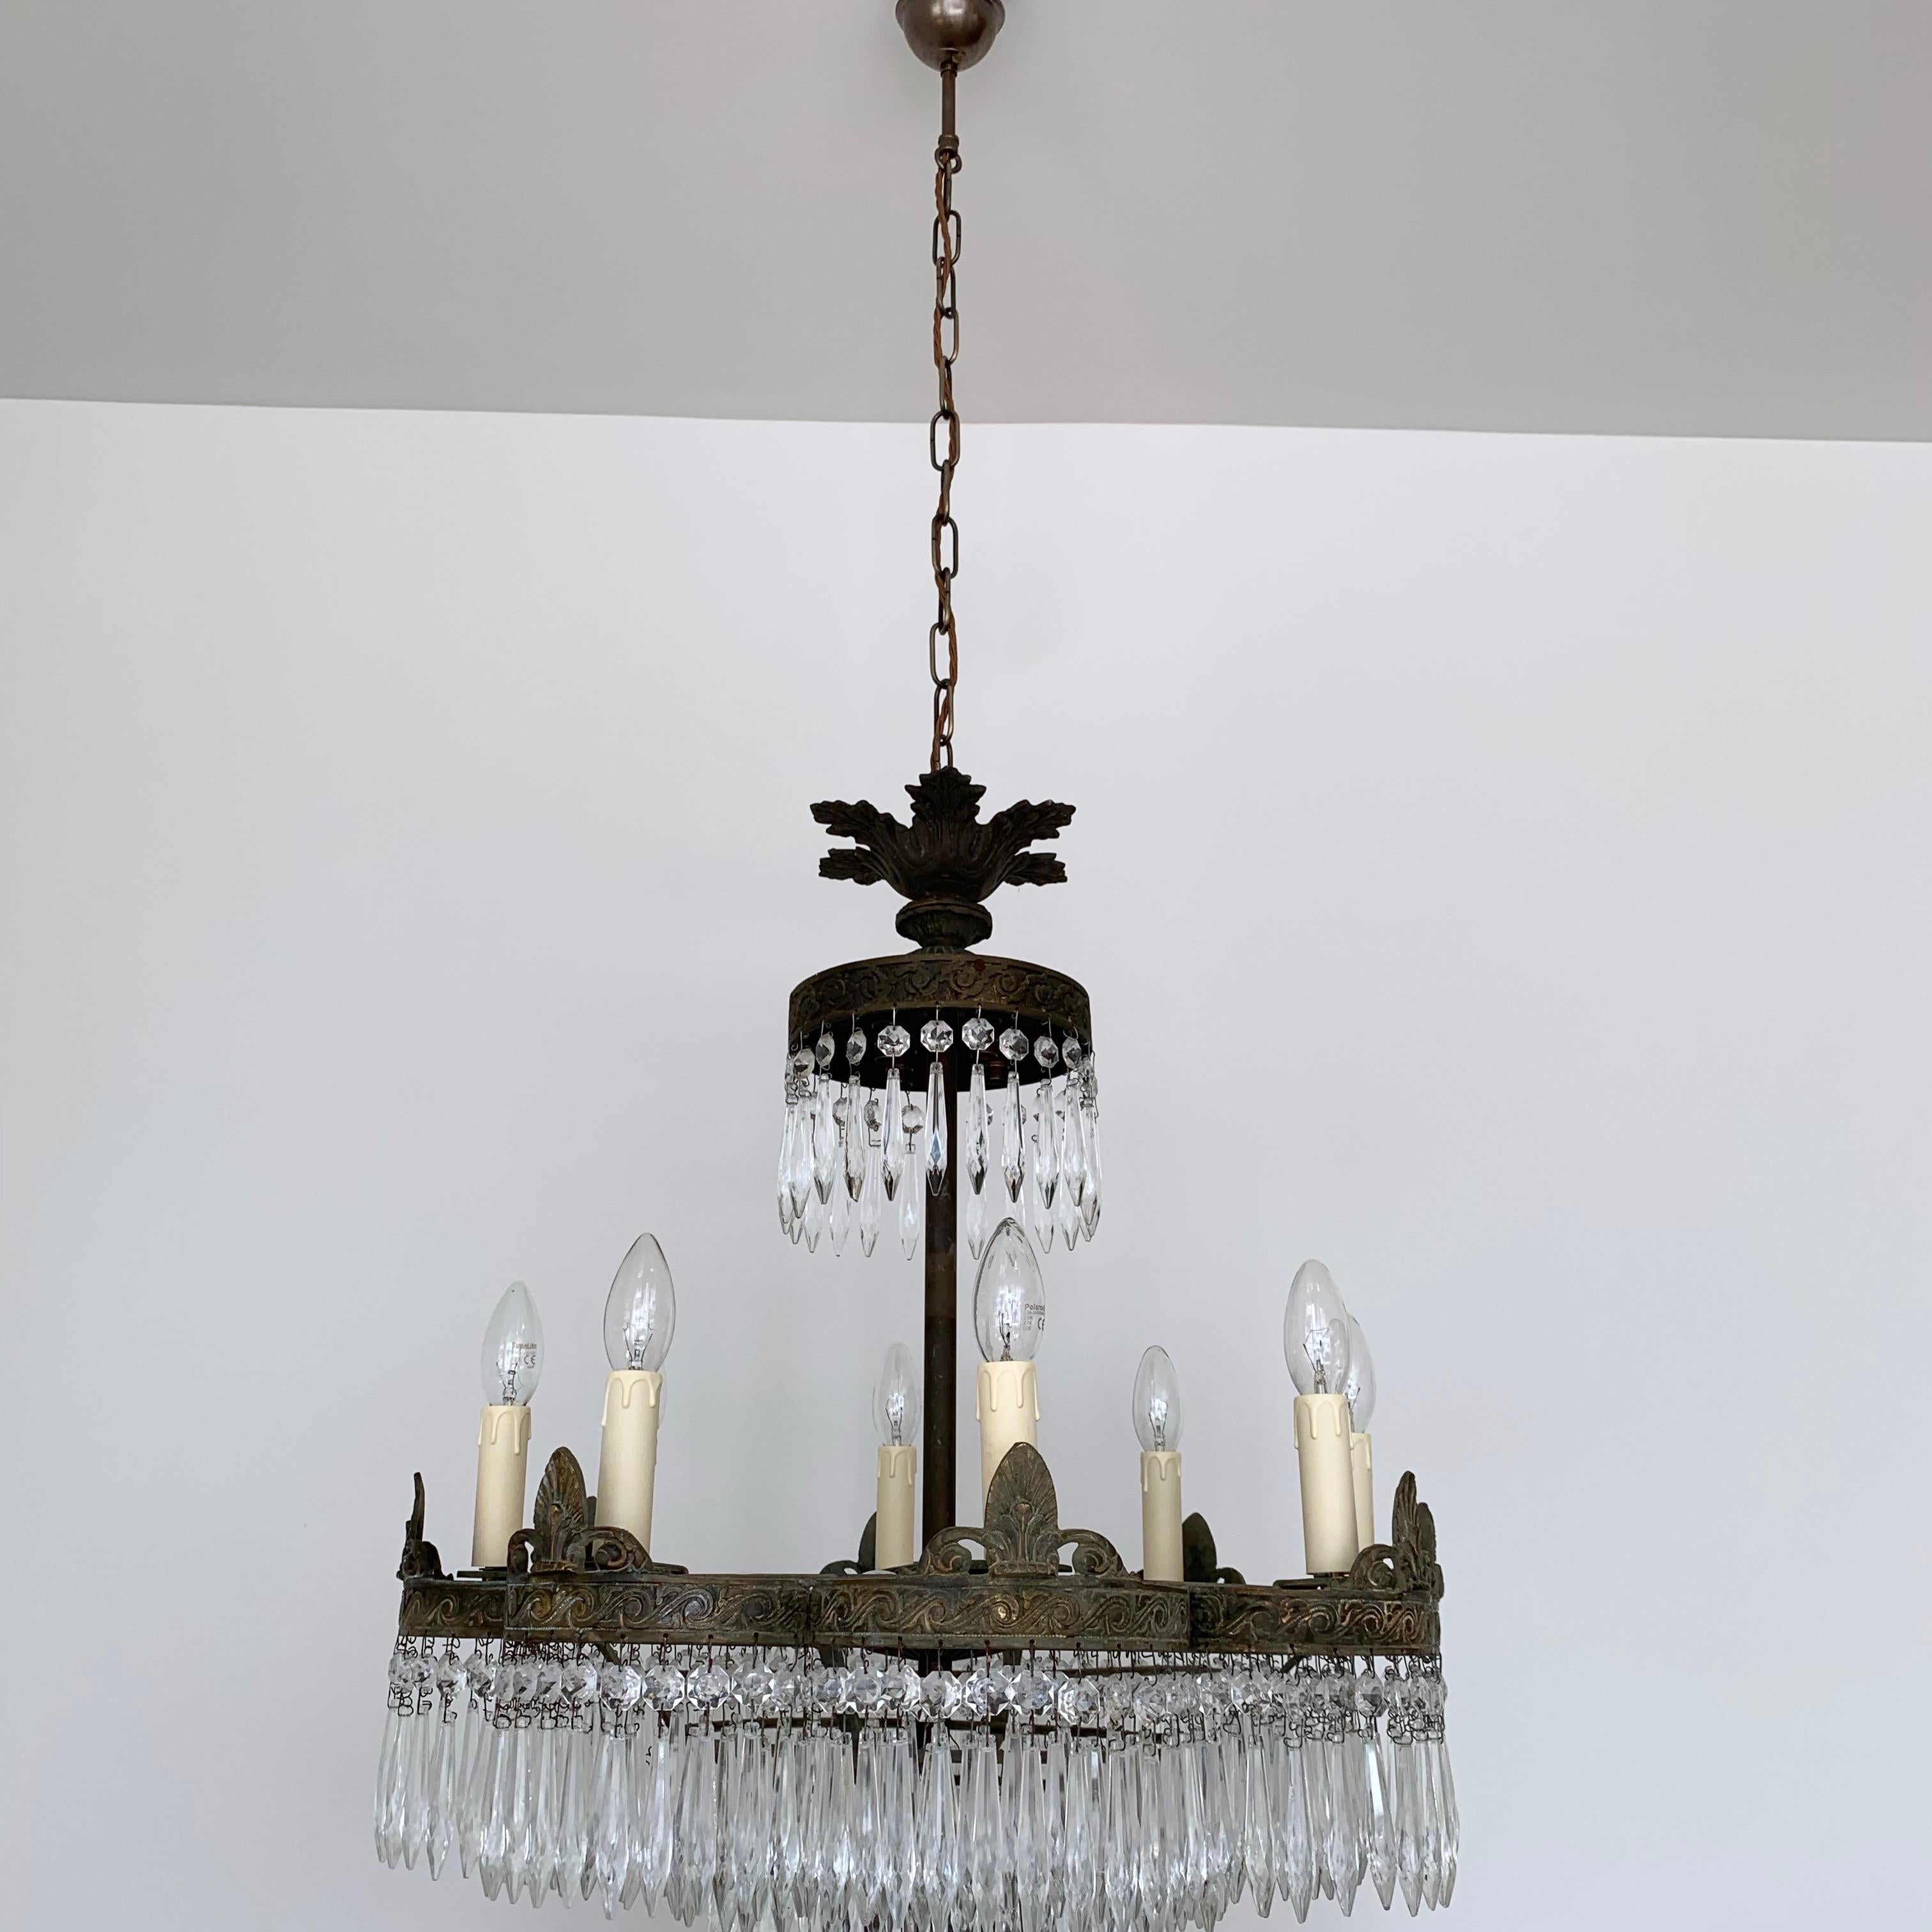 Early 1900s French Waterfall Petal Frame Chandelier with Glass Icicle Drops For Sale 3